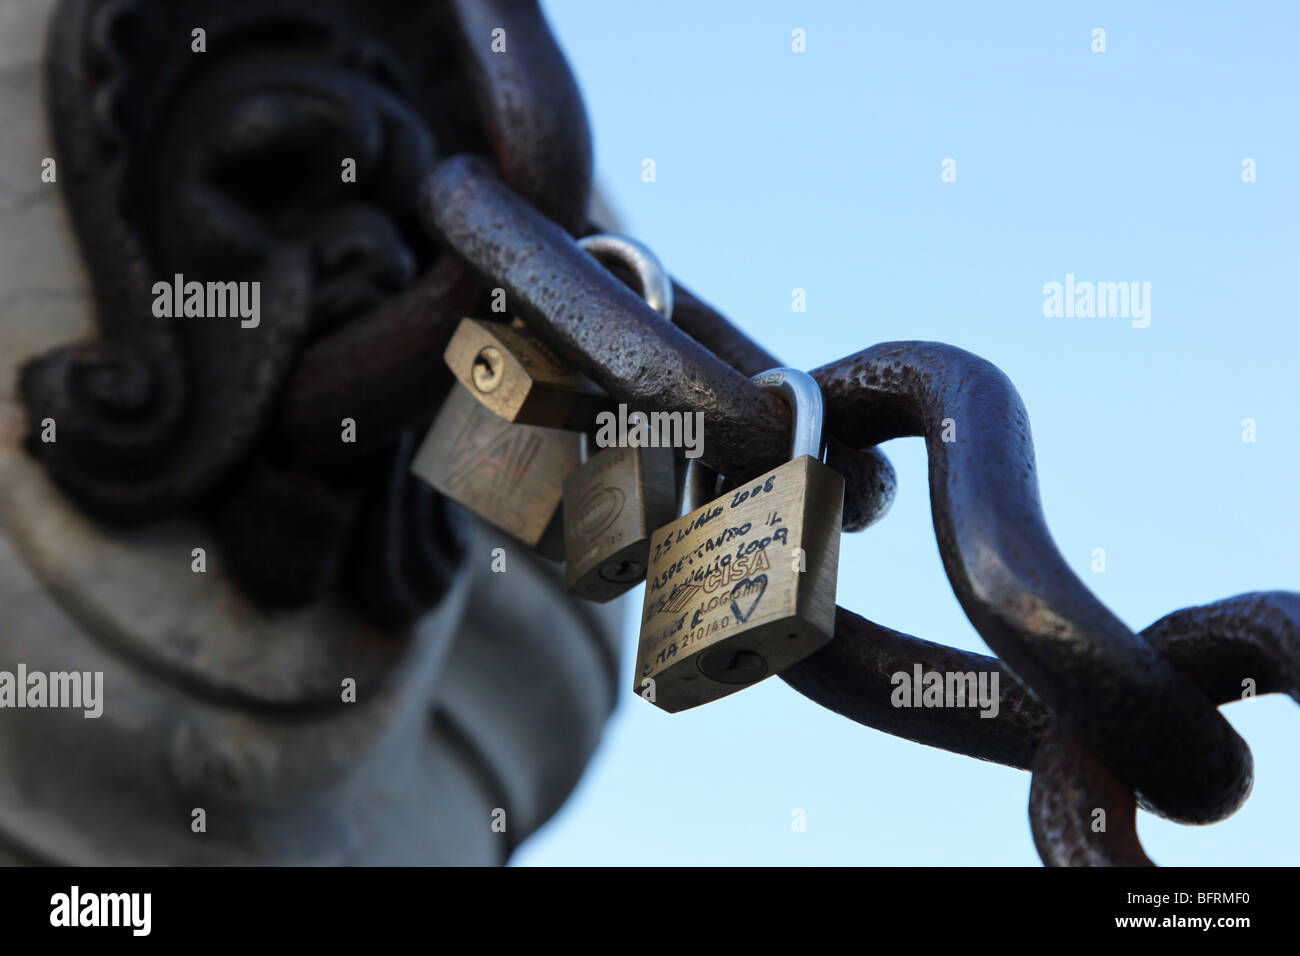 Lovers attach padlocks, to symbolise their unbreakable love in front of Michelangelo's David in Florence, Italy. Stock Photo